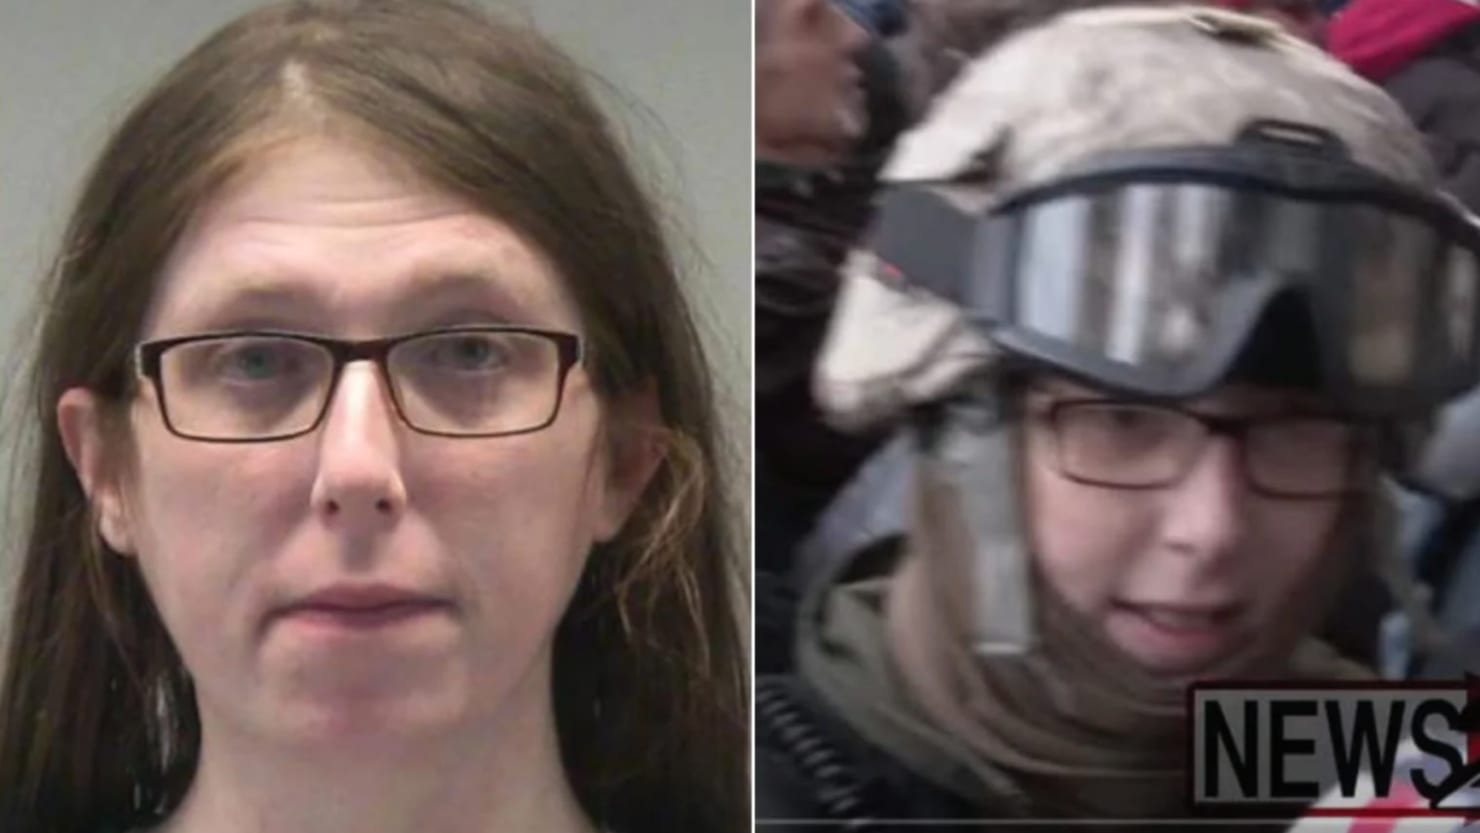 Jessica Watkins threatened for critics of Sue’s far-right group after the riot